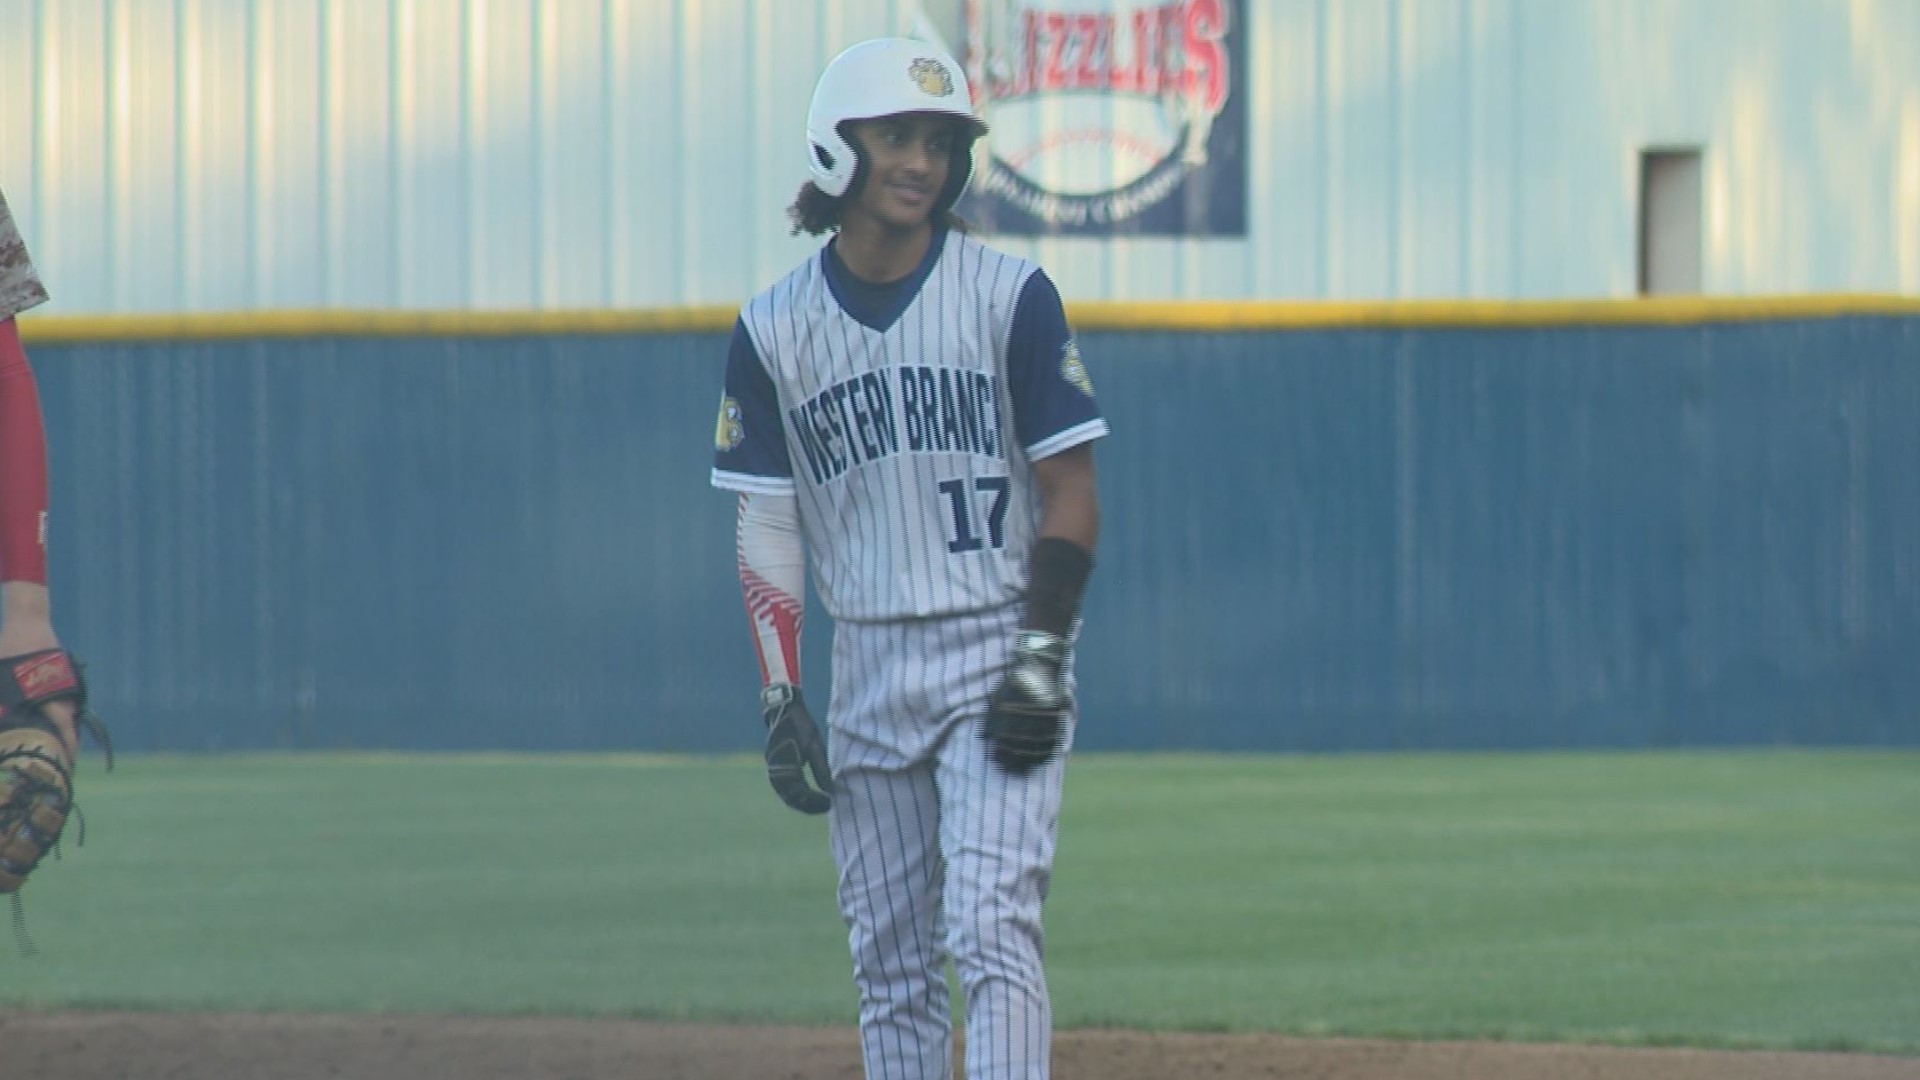 Western Branch would tie the game at 1-1 and took its first lead of the game when Jacob Wright got a bases clearing double to right center and 4-1 advantage.